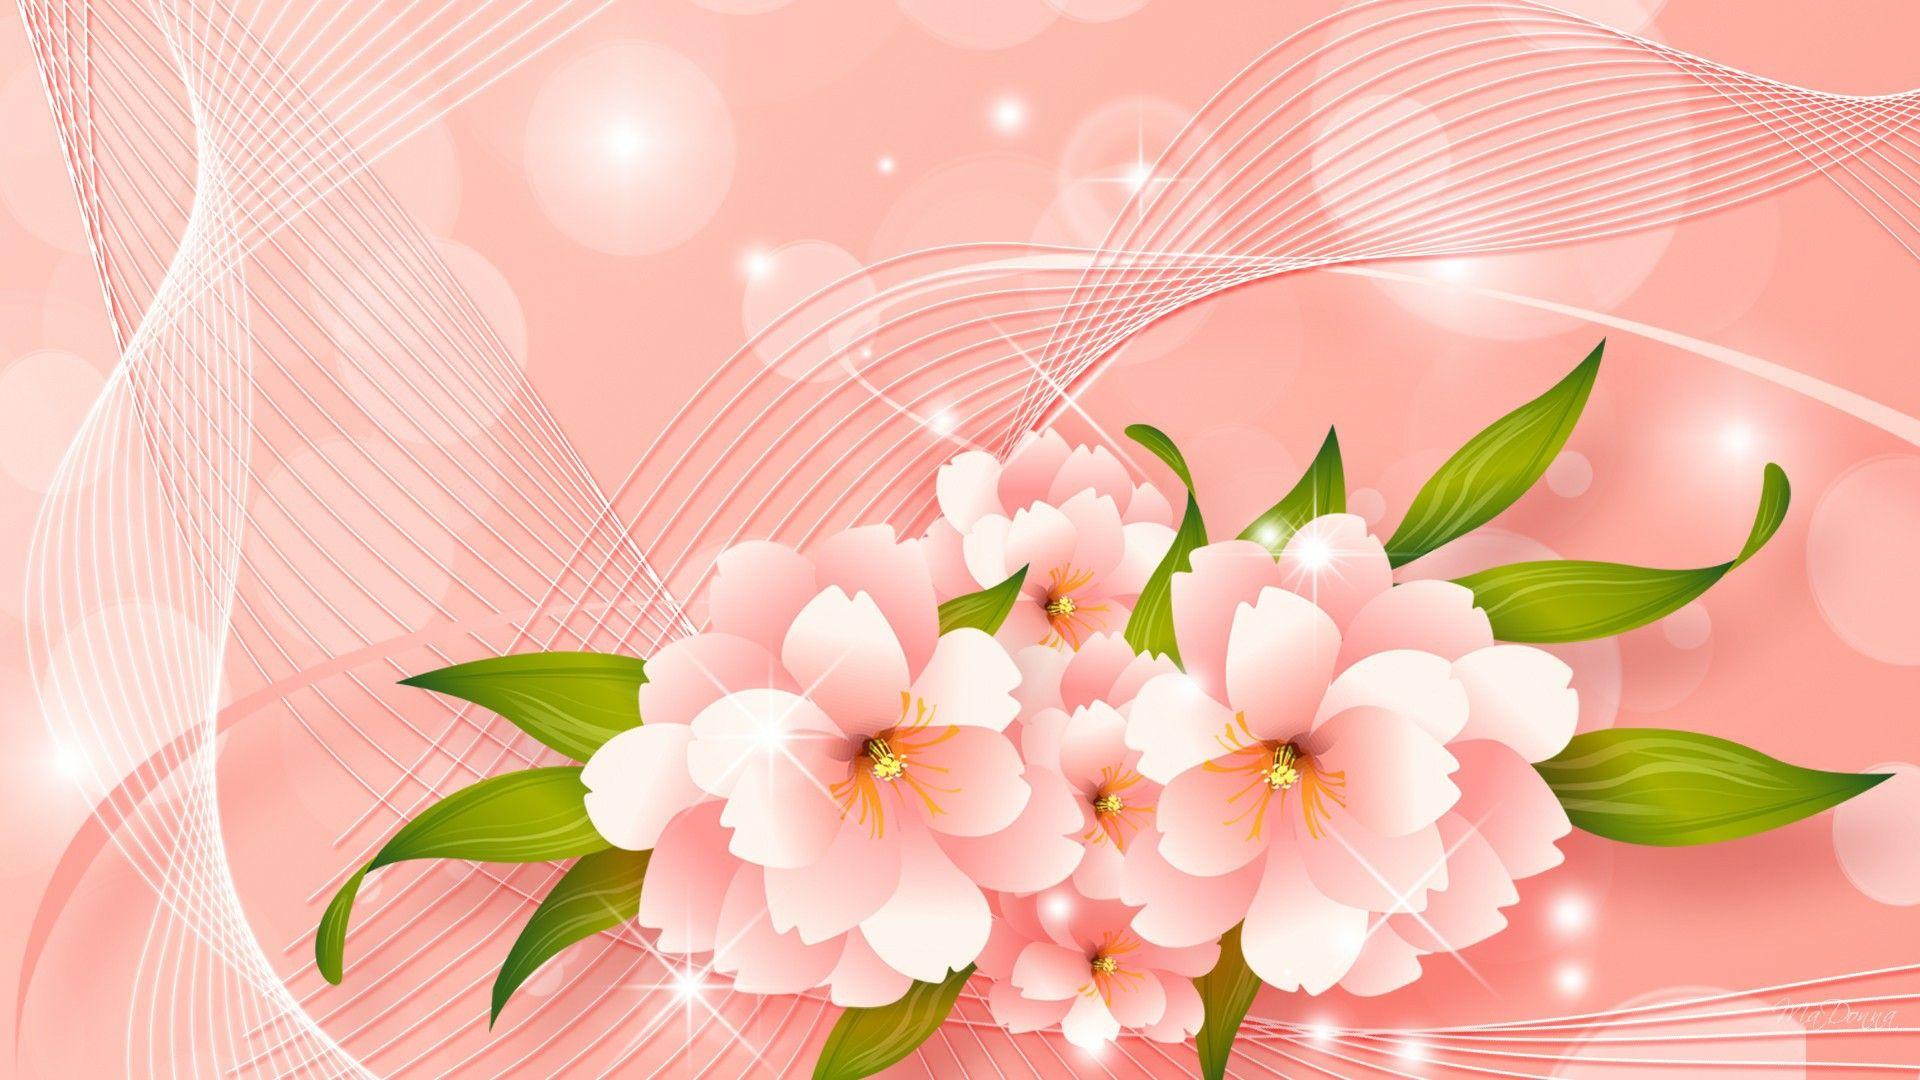 Free 3D Abstract Pink Flowers HD Peach Flowers Wallpaper Download